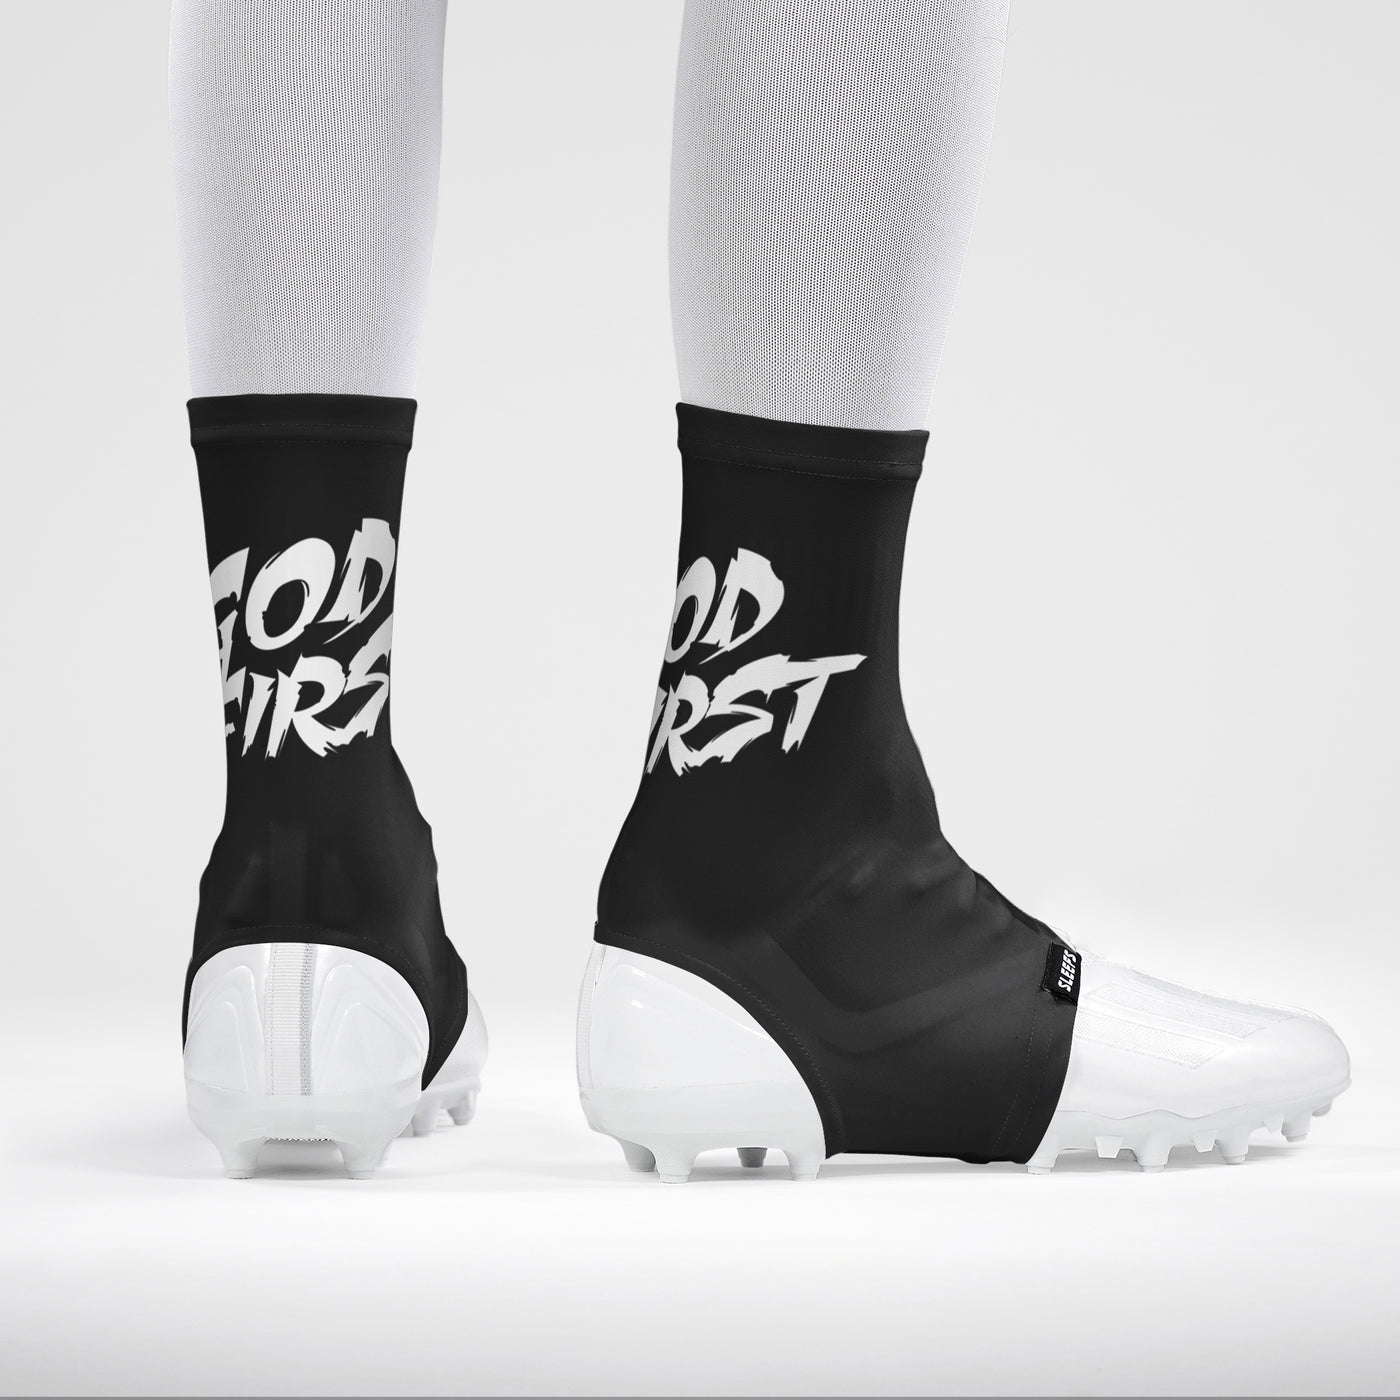 God First Black Spats / Cleat Covers